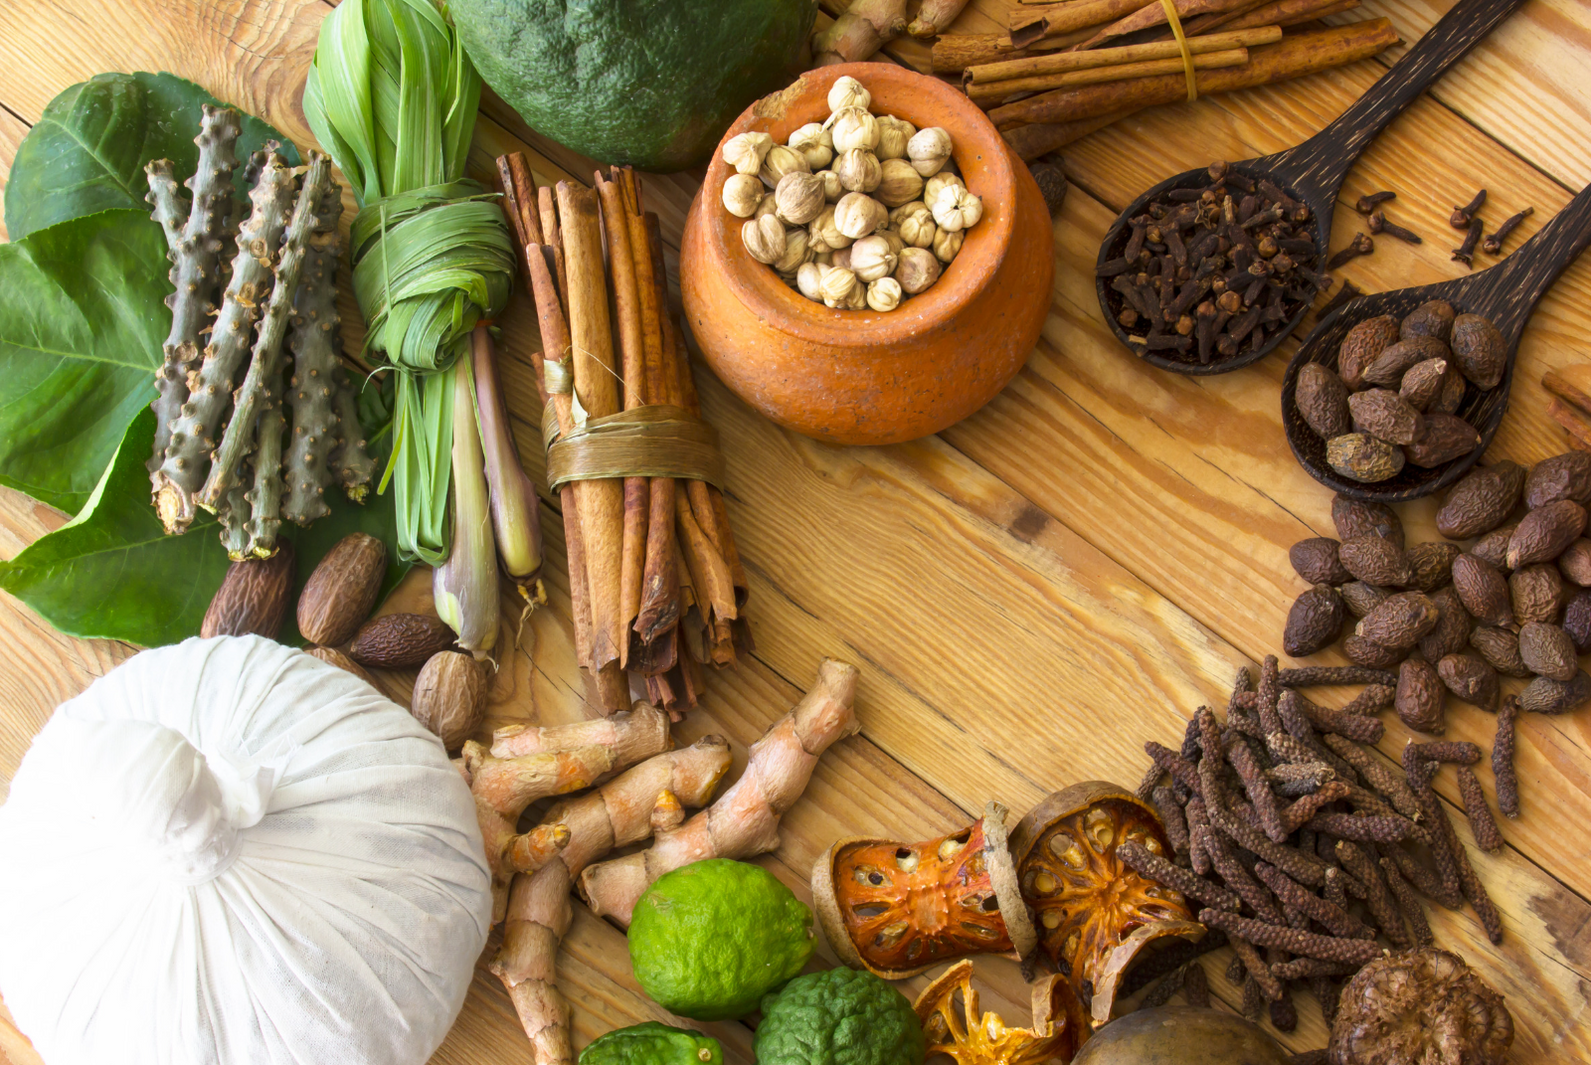 A variety of herbs and spices are laid out on a wooden surface, including long pepper, cloves, cinnamon, fresh turmeric, and more.